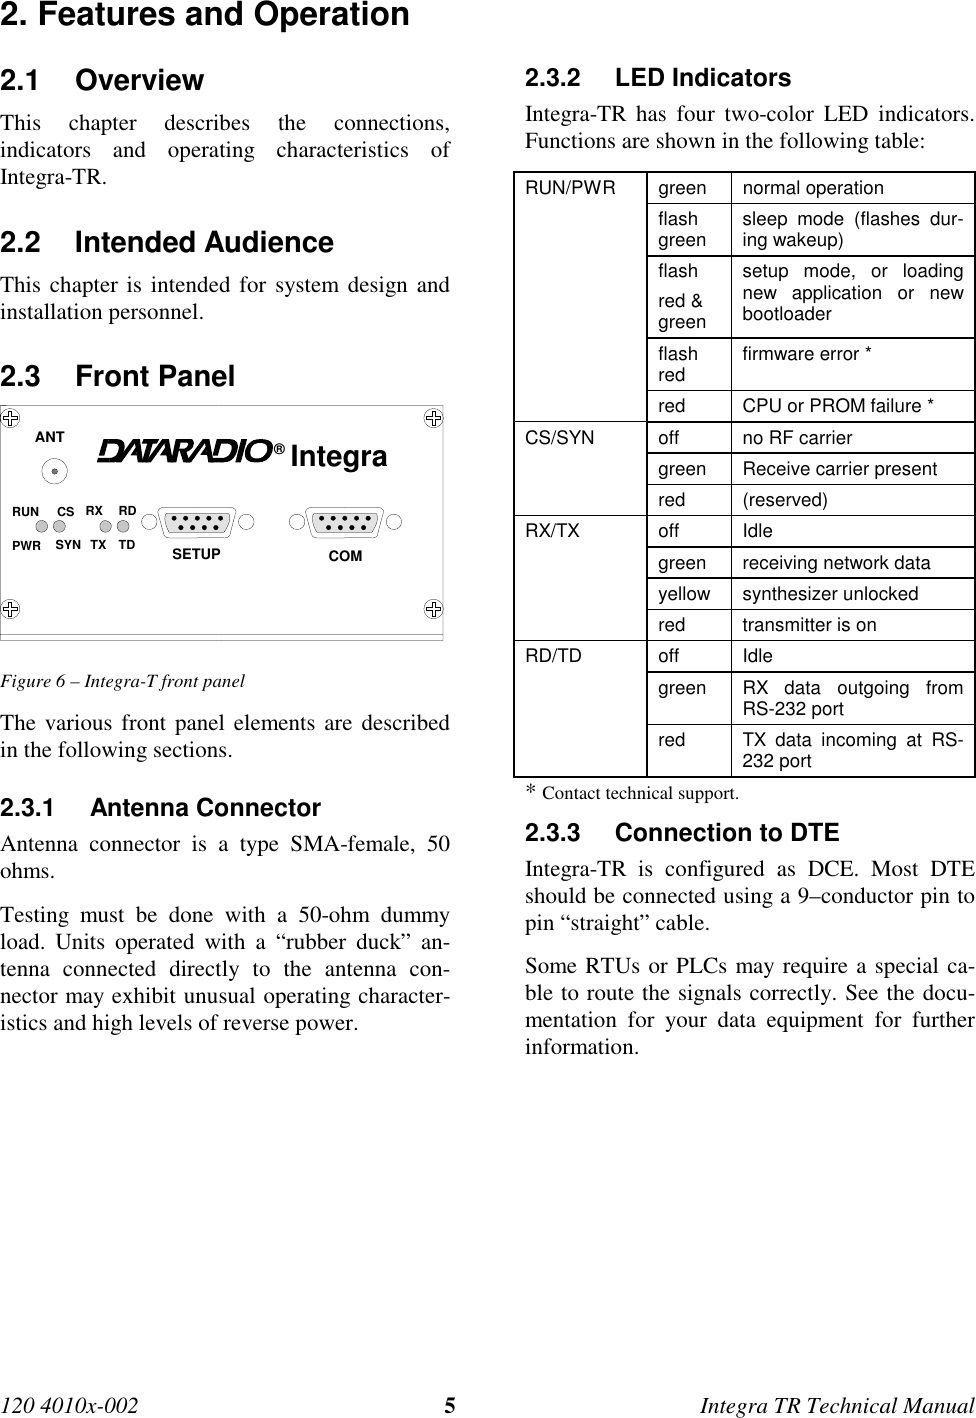 120 4010x-002 5Integra TR Technical Manual2. Features and Operation2.1 OverviewThis chapter describes the connections,indicators and operating characteristics ofIntegra-TR.2.2 Intended AudienceThis chapter is intended for system design andinstallation personnel.2.3 Front PanelIntegra®ANTSETUP COMRUN CS RX RDPWR SYN TXTDFigure 6 – Integra-T front panelThe various front panel elements are describedin the following sections.2.3.1 Antenna ConnectorAntenna connector is a type SMA-female, 50ohms.Testing must be done with a 50-ohm dummyload. Units operated with a “rubber duck” an-tenna connected directly to the antenna con-nector may exhibit unusual operating character-istics and high levels of reverse power.2.3.2 LED IndicatorsIntegra-TR has four two-color LED indicators.Functions are shown in the following table:RUN/PWR green normal operationflashgreen sleep mode (flashes dur-ing wakeup)flashred &amp;greensetup mode, or loadingnew application or newbootloaderflashred firmware error *red CPU or PROM failure *CS/SYN off no RF carriergreen Receive carrier presentred (reserved)RX/TX off Idlegreen receiving network datayellow synthesizer unlockedred transmitter is onRD/TD off Idlegreen RX data outgoing fromRS-232 portred TX data incoming at RS-232 port* Contact technical support.2.3.3  Connection to DTEIntegra-TR is configured as DCE. Most DTEshould be connected using a 9–conductor pin topin “straight” cable.Some RTUs or PLCs may require a special ca-ble to route the signals correctly. See the docu-mentation for your data equipment for furtherinformation.